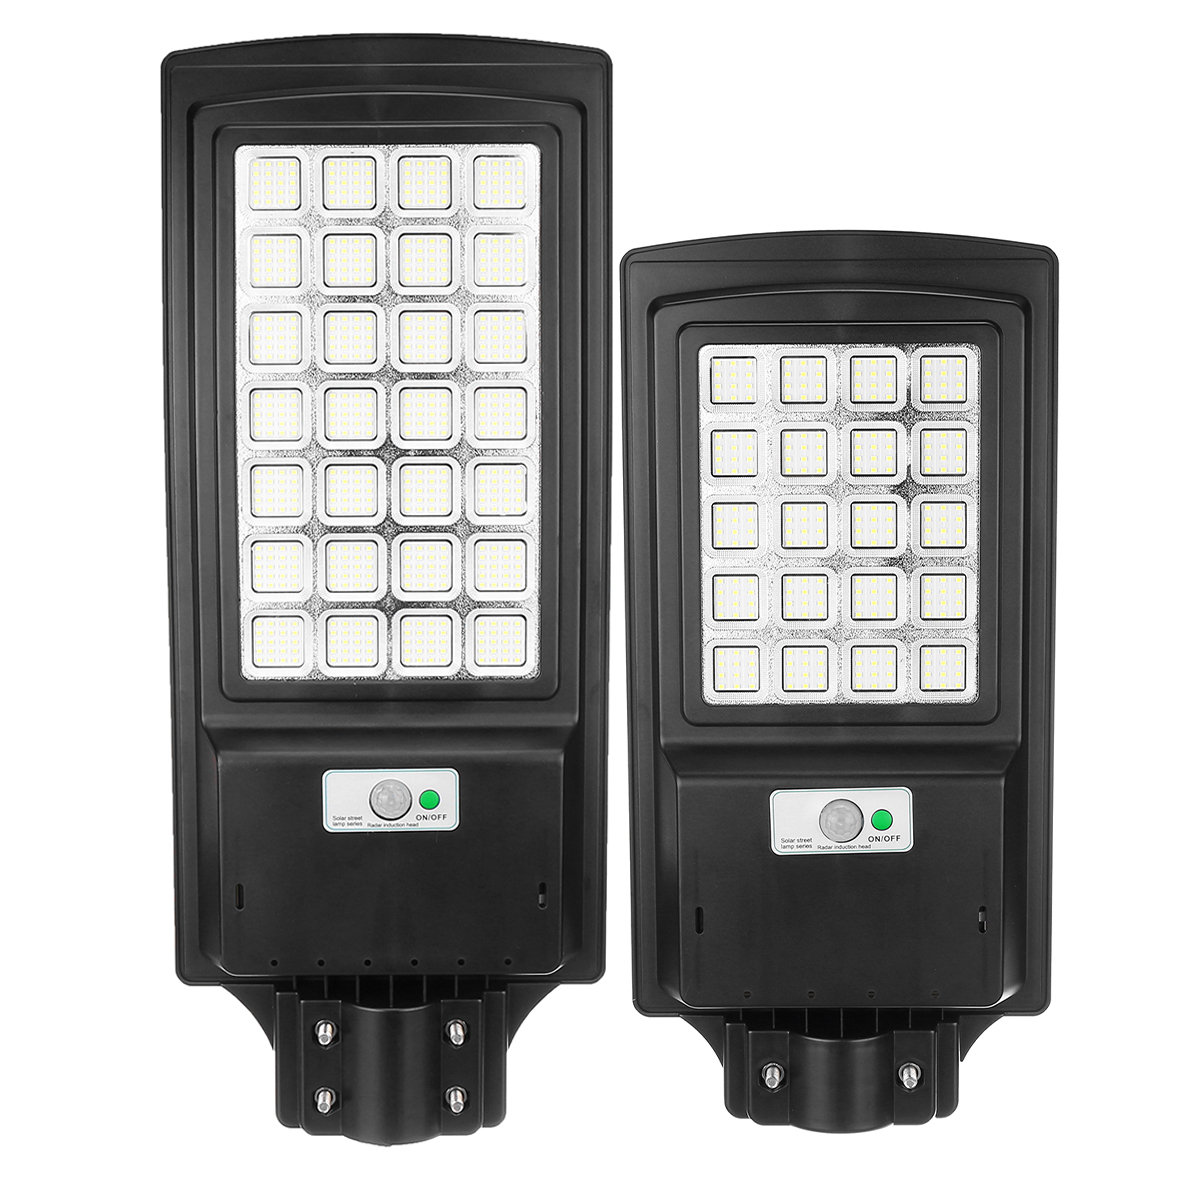 Find 240/560LED Solar Street Wall Light Solar Powered IP65 Waterproof Lamp PIR Motion Sensor Lamp Outdoor Garden for Sale on Gipsybee.com with cryptocurrencies